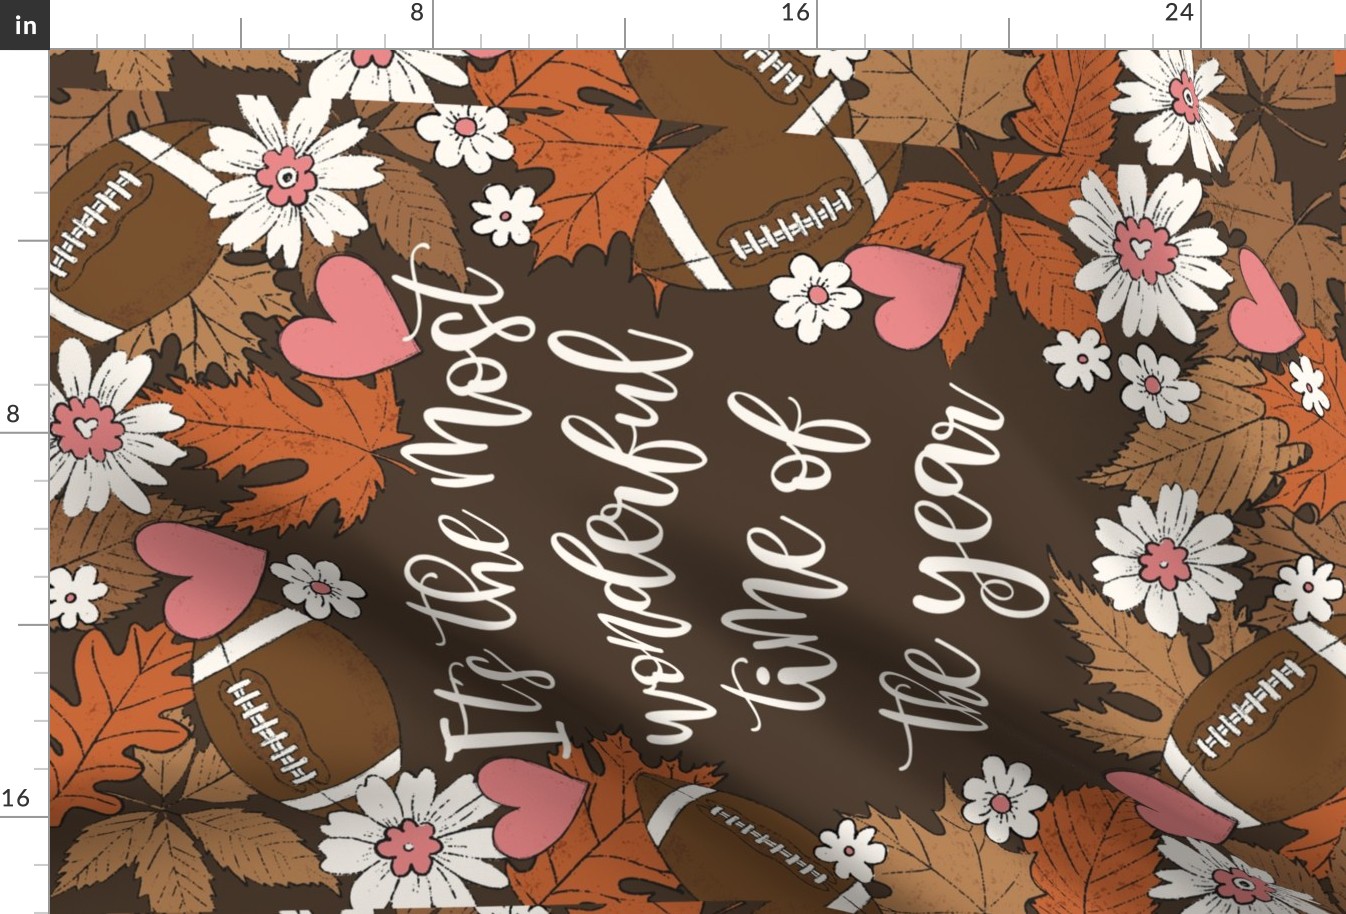 Football Most Wonderful Time of the Year Chocolate Teatowel 18 x 27 inches